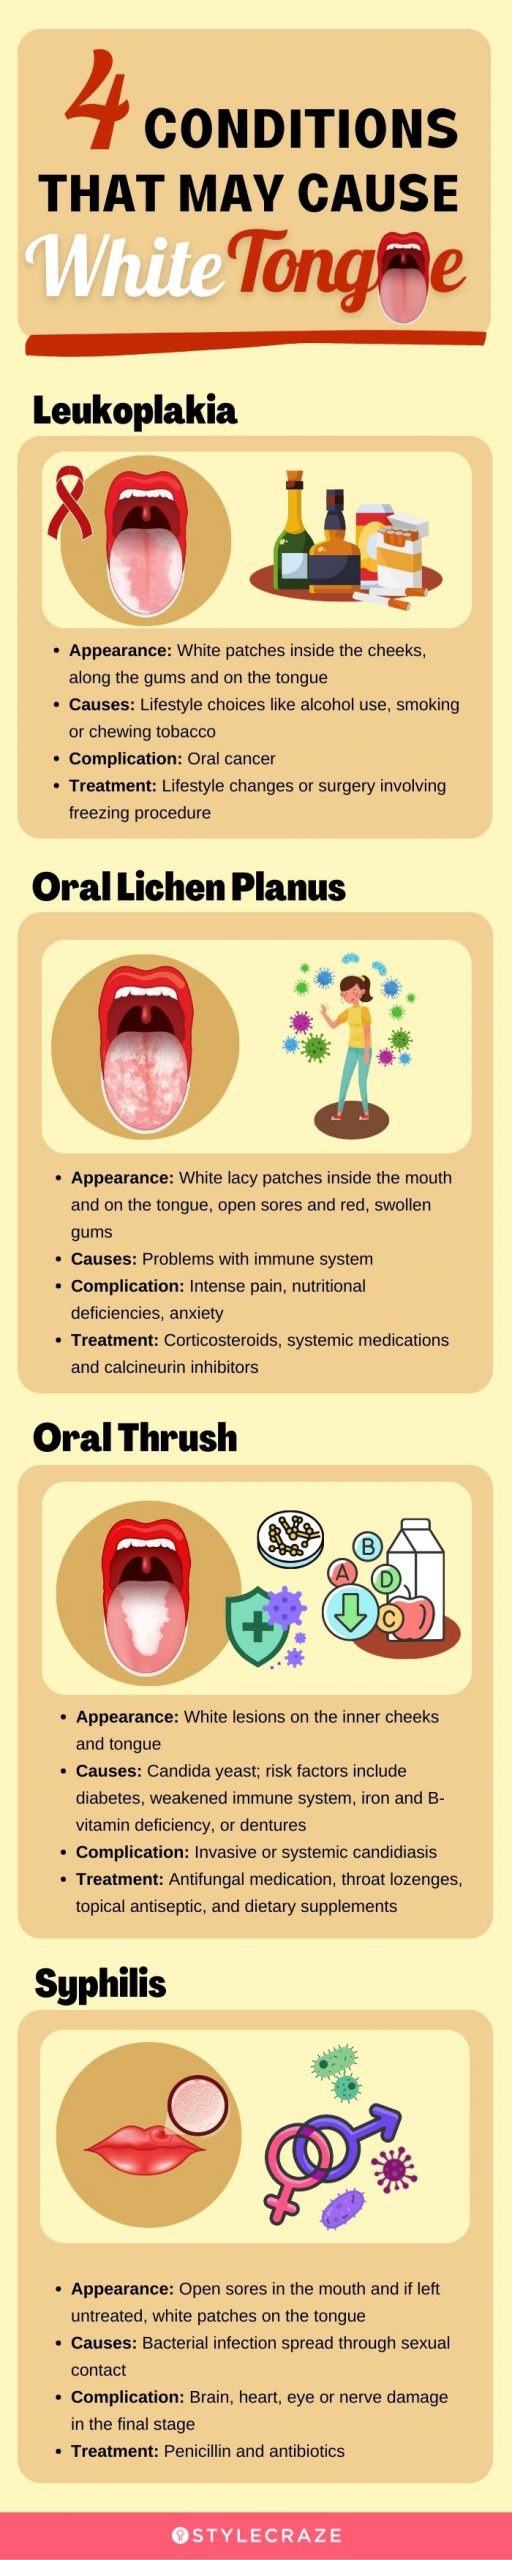 4 conditions that may cause white tongue (infographic)